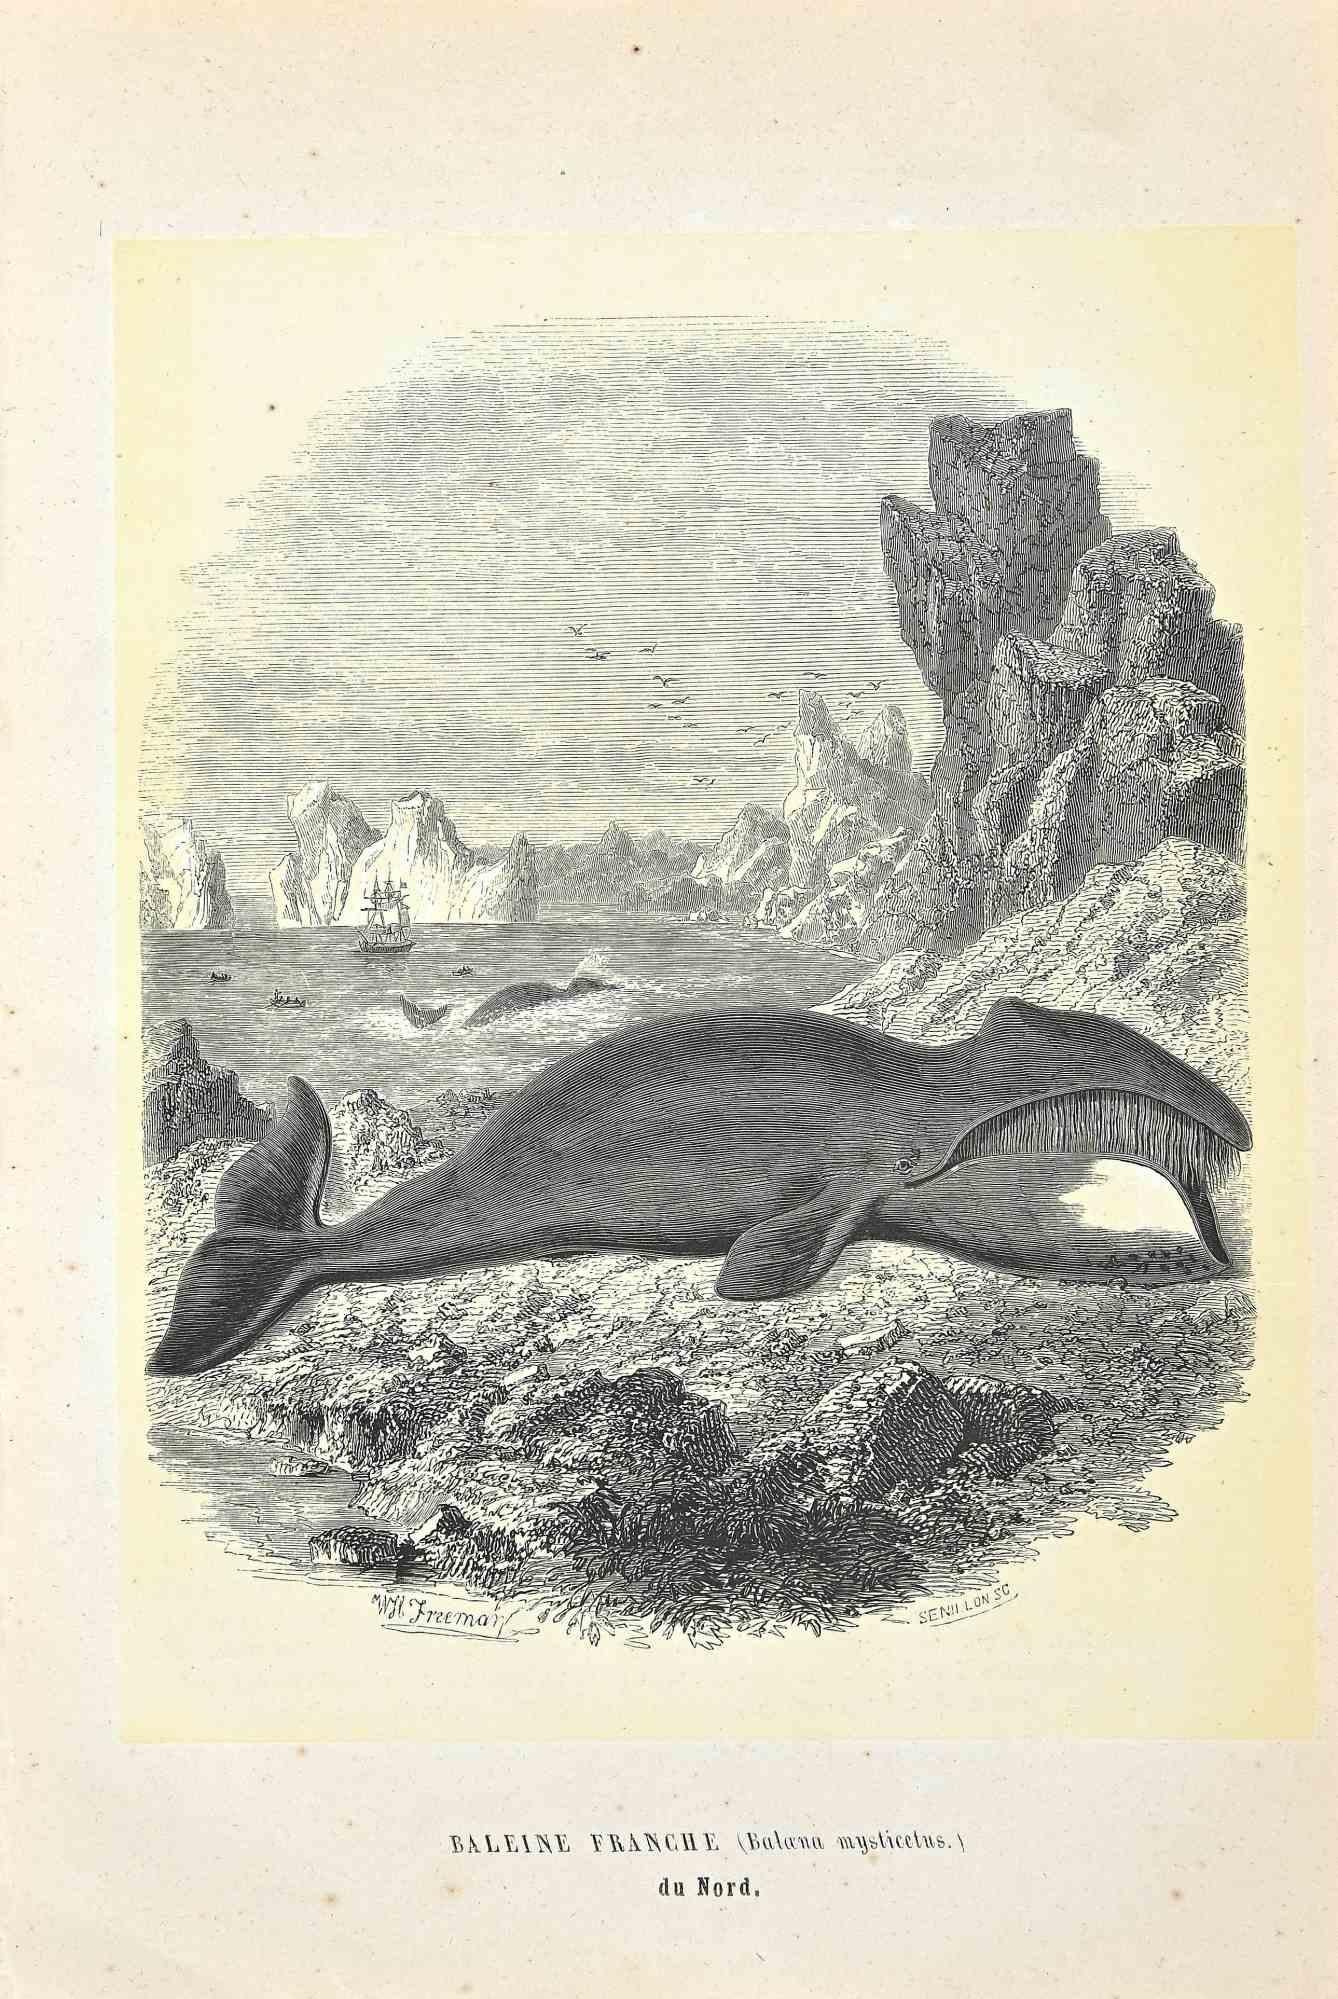 North Atlantic Right Whale is an original lithograph on ivory-colored paper, realized by Paul Gervais (1816-1879). The artwork is from The Series of "Les Trois Règnes de la Nature", and was published in 1854.

Good conditions except for some